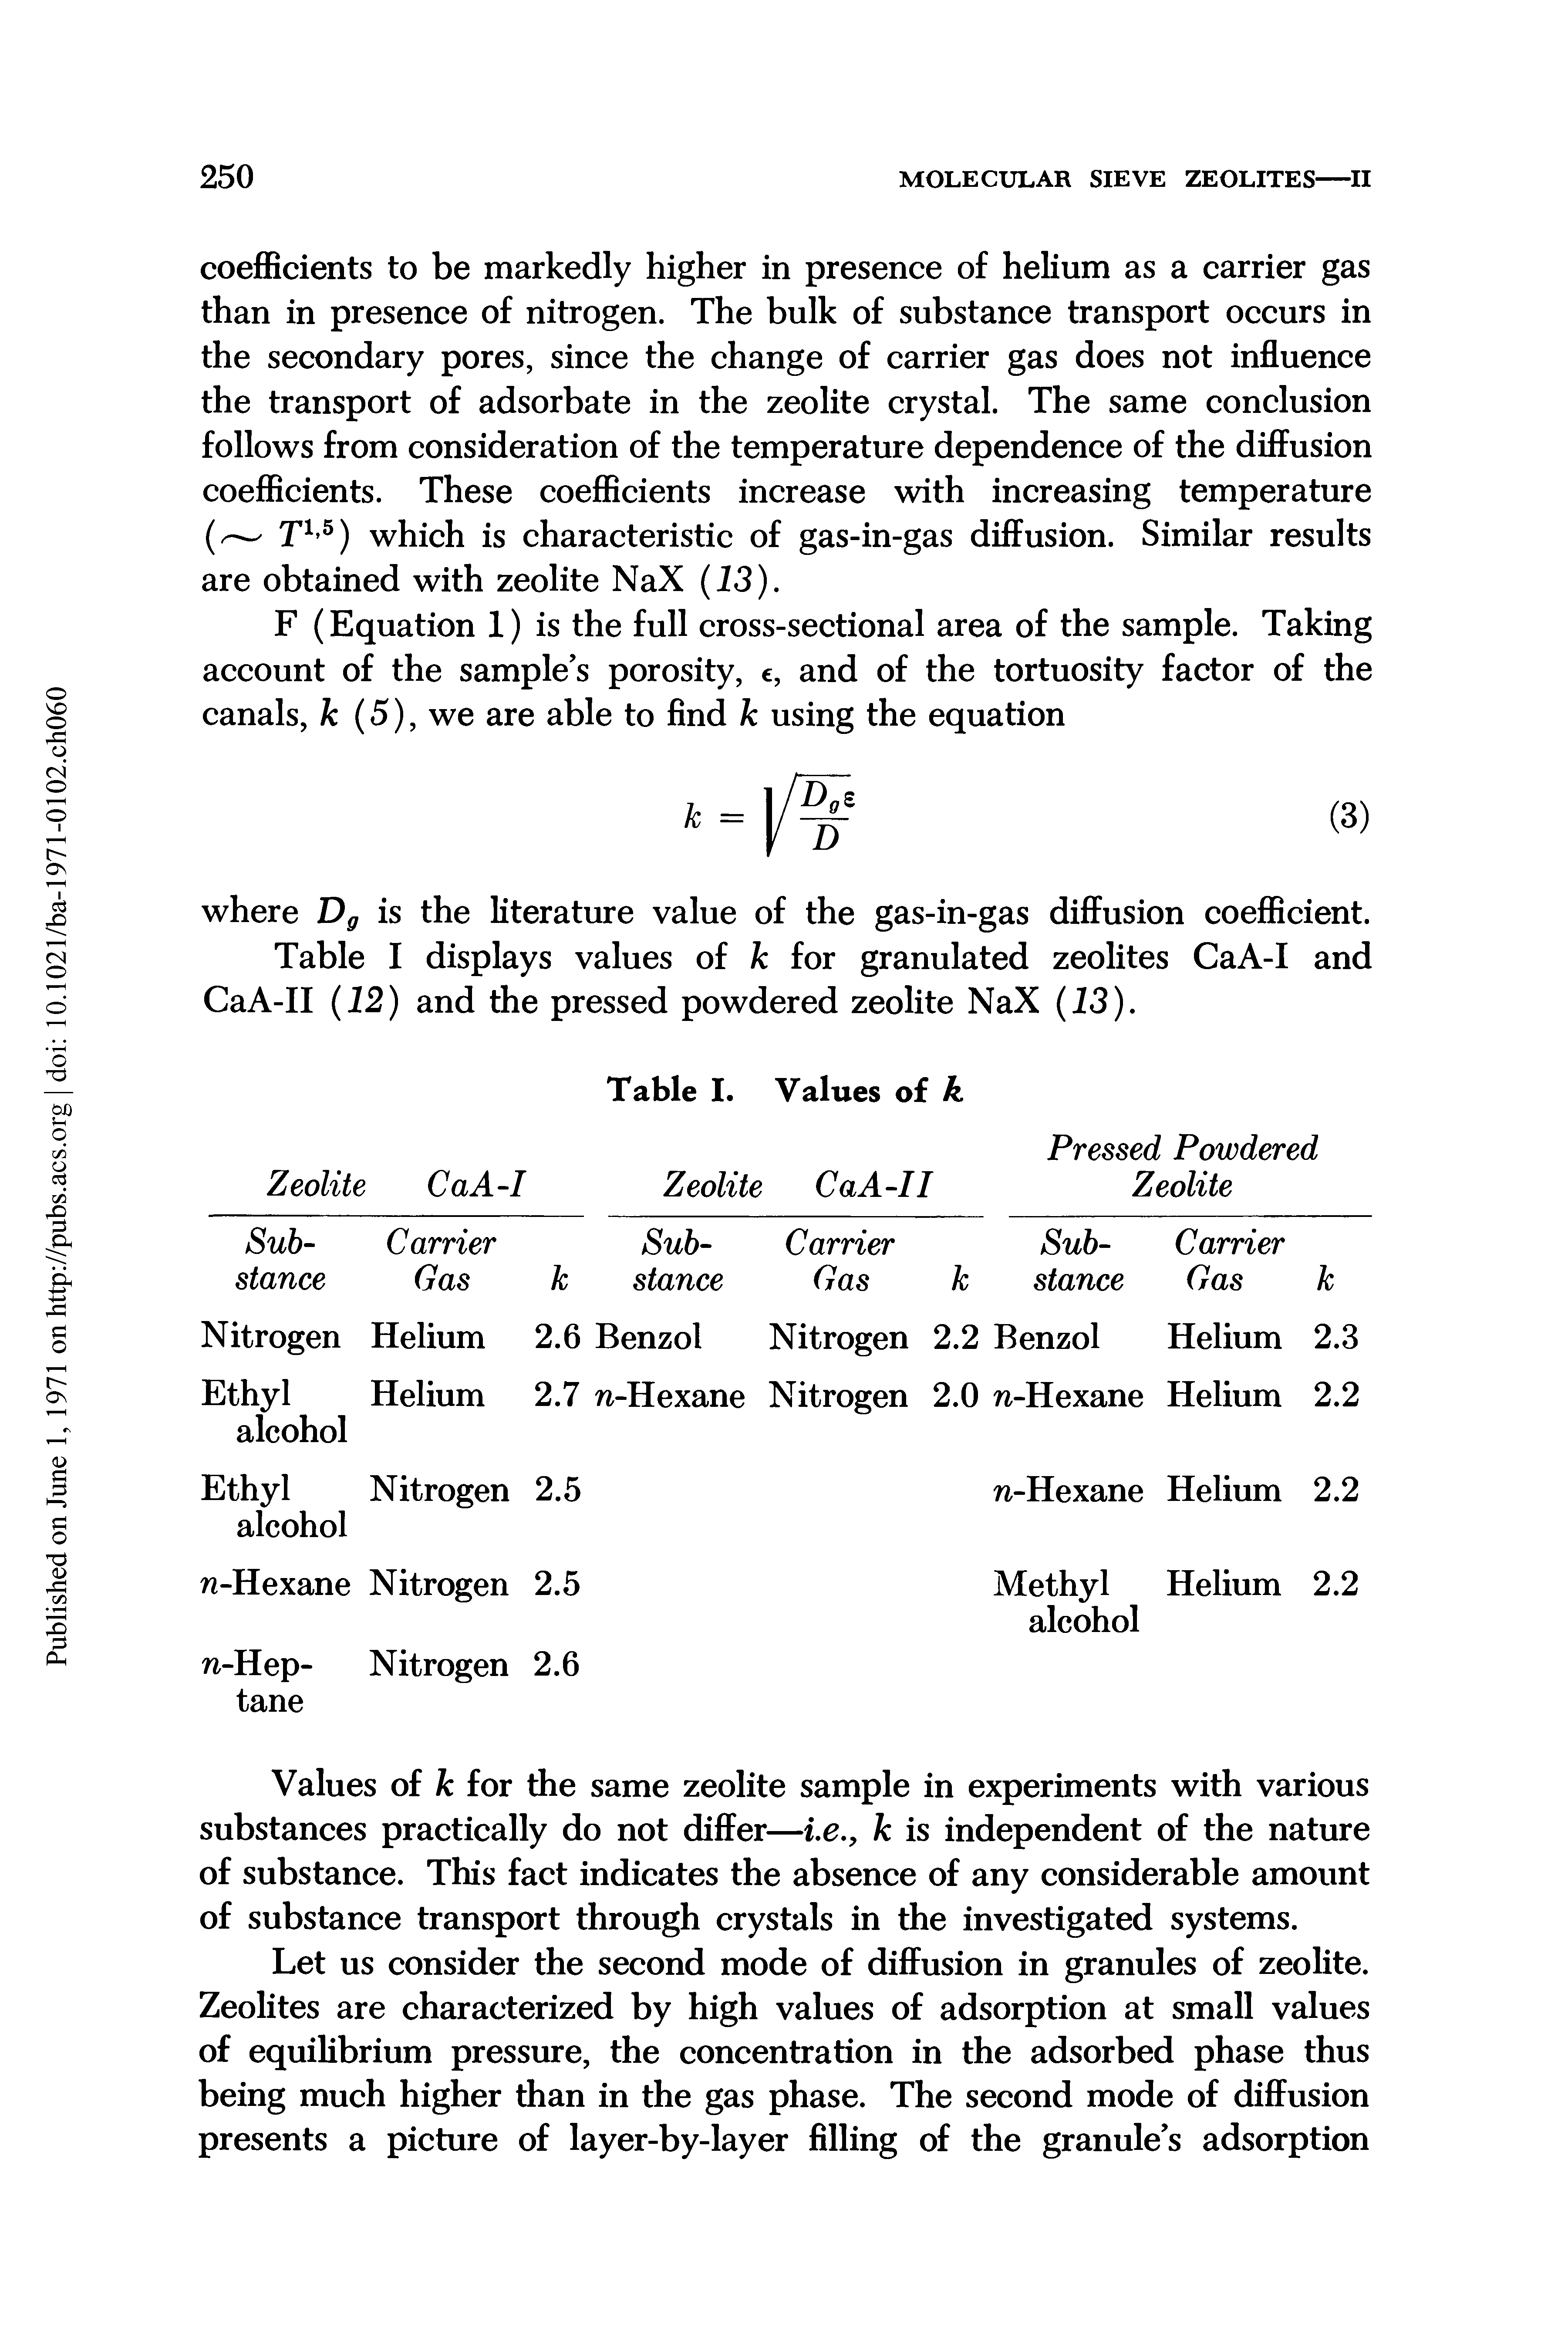 Table I displays values of k for granulated zeolites CaA-I and CaA-II 12) and the pressed powdered zeolite NaX 13).